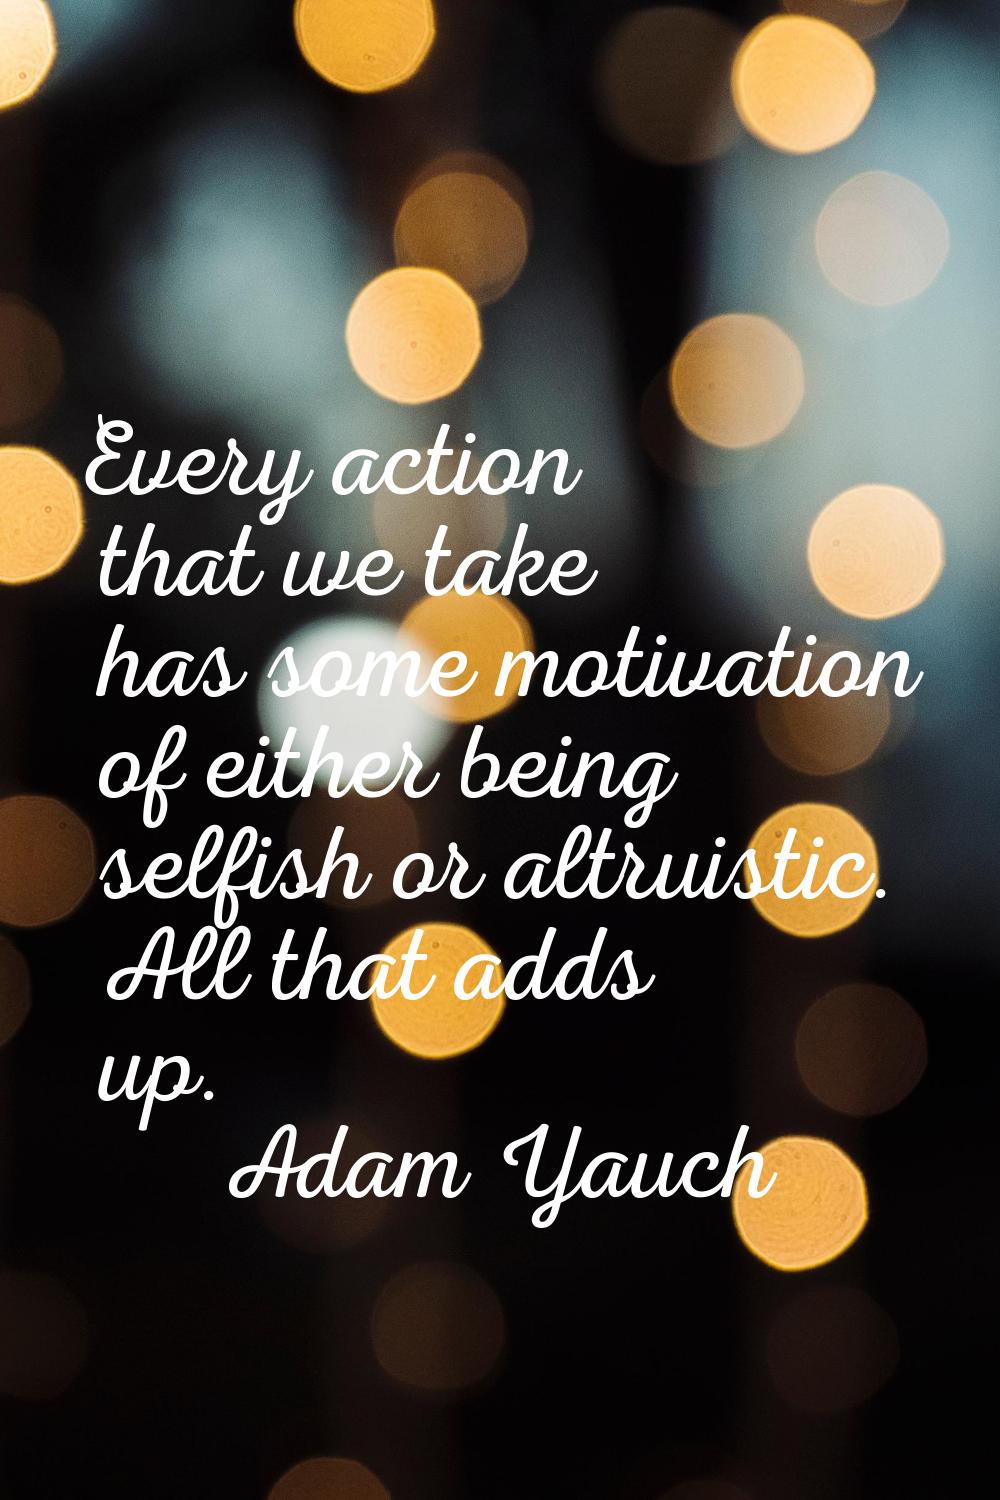 Every action that we take has some motivation of either being selfish or altruistic. All that adds 